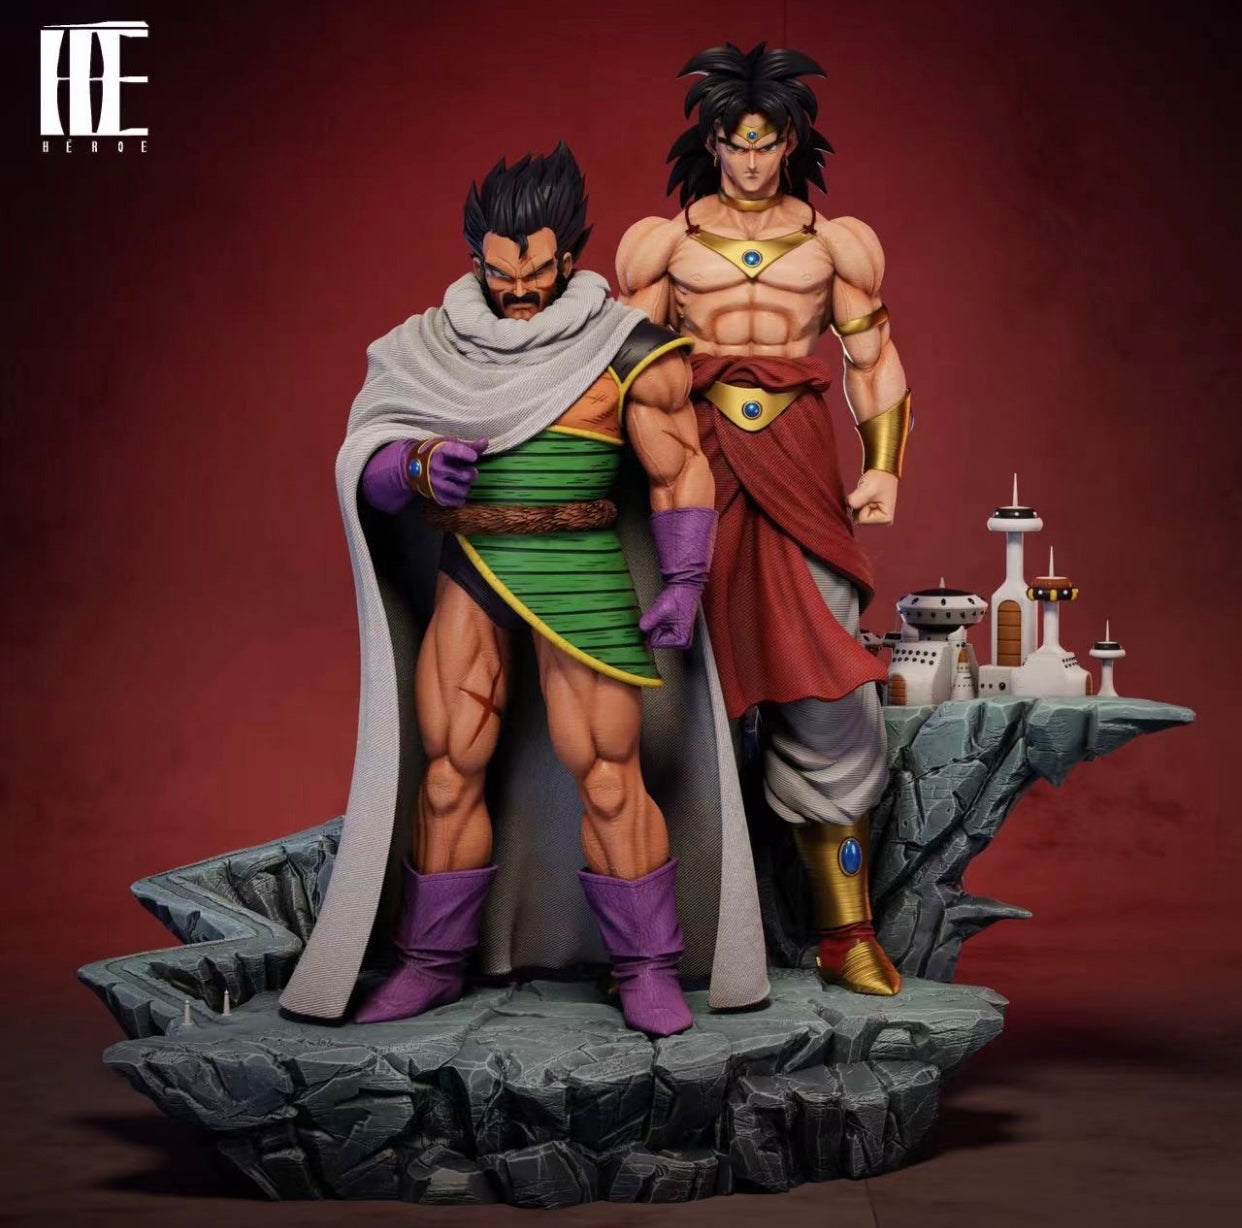 [PRE ORDER] Dragon Ball Z - Heroe Collectibles - Broly and Paragus(Price does not include shipping - Please Read Description)